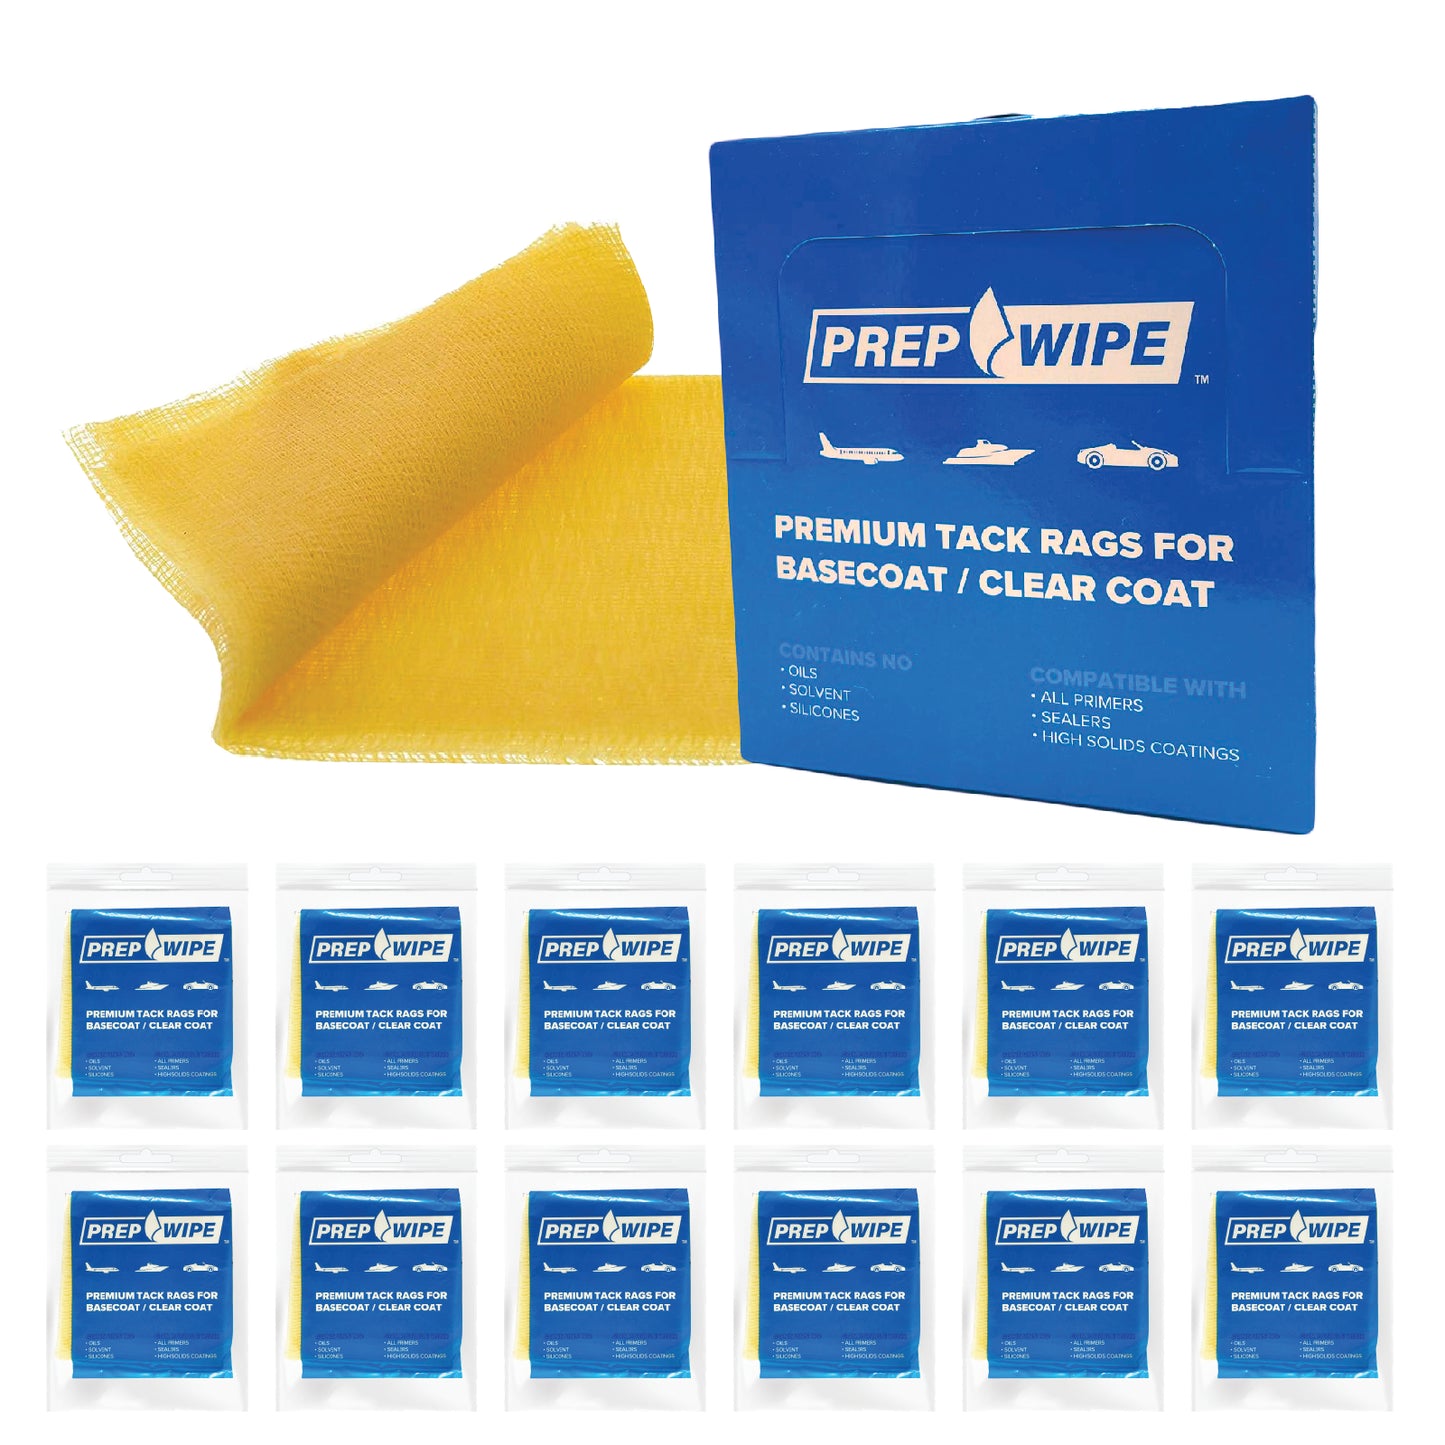 Prep-Wipes Tack Cloths – Professional Woodworking and Painting